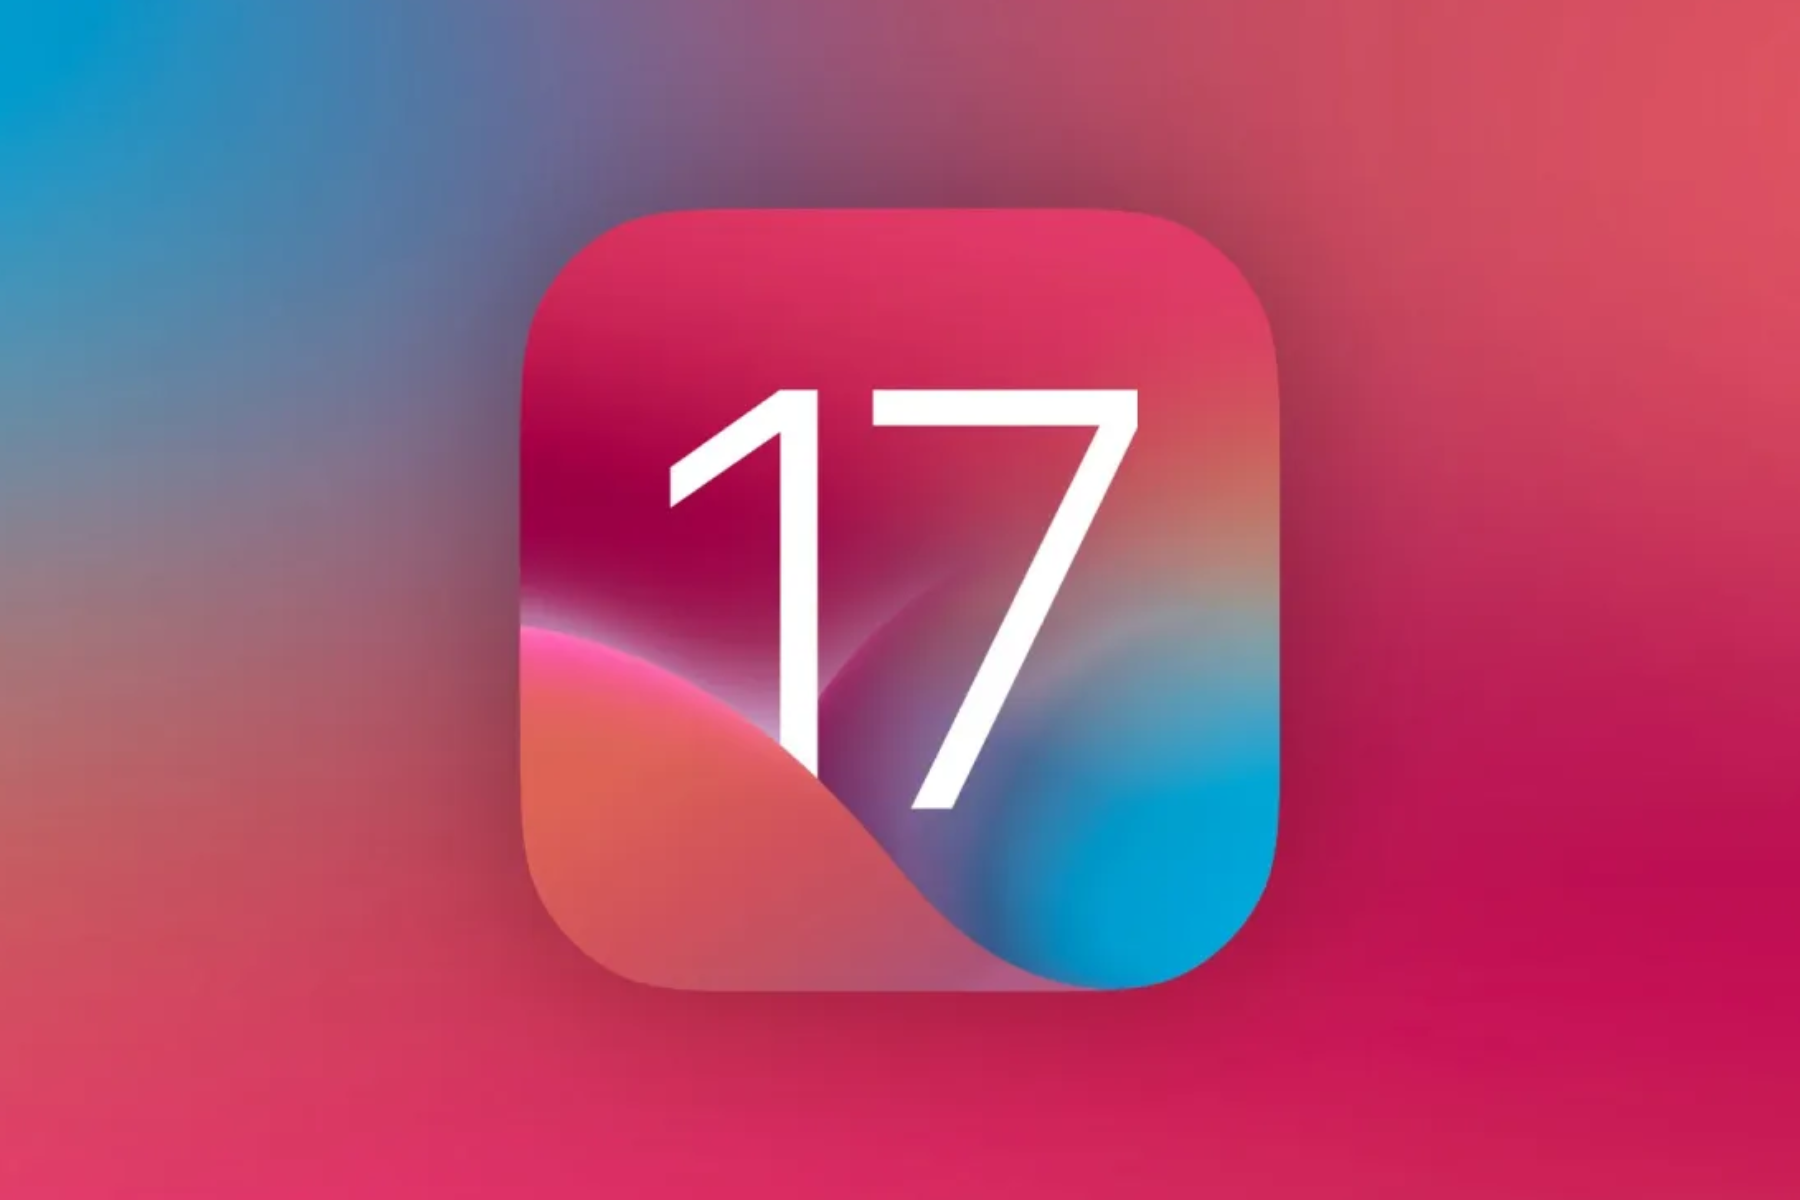 IOS 17 Release Date - When Will IOS 17 Be Available To Download